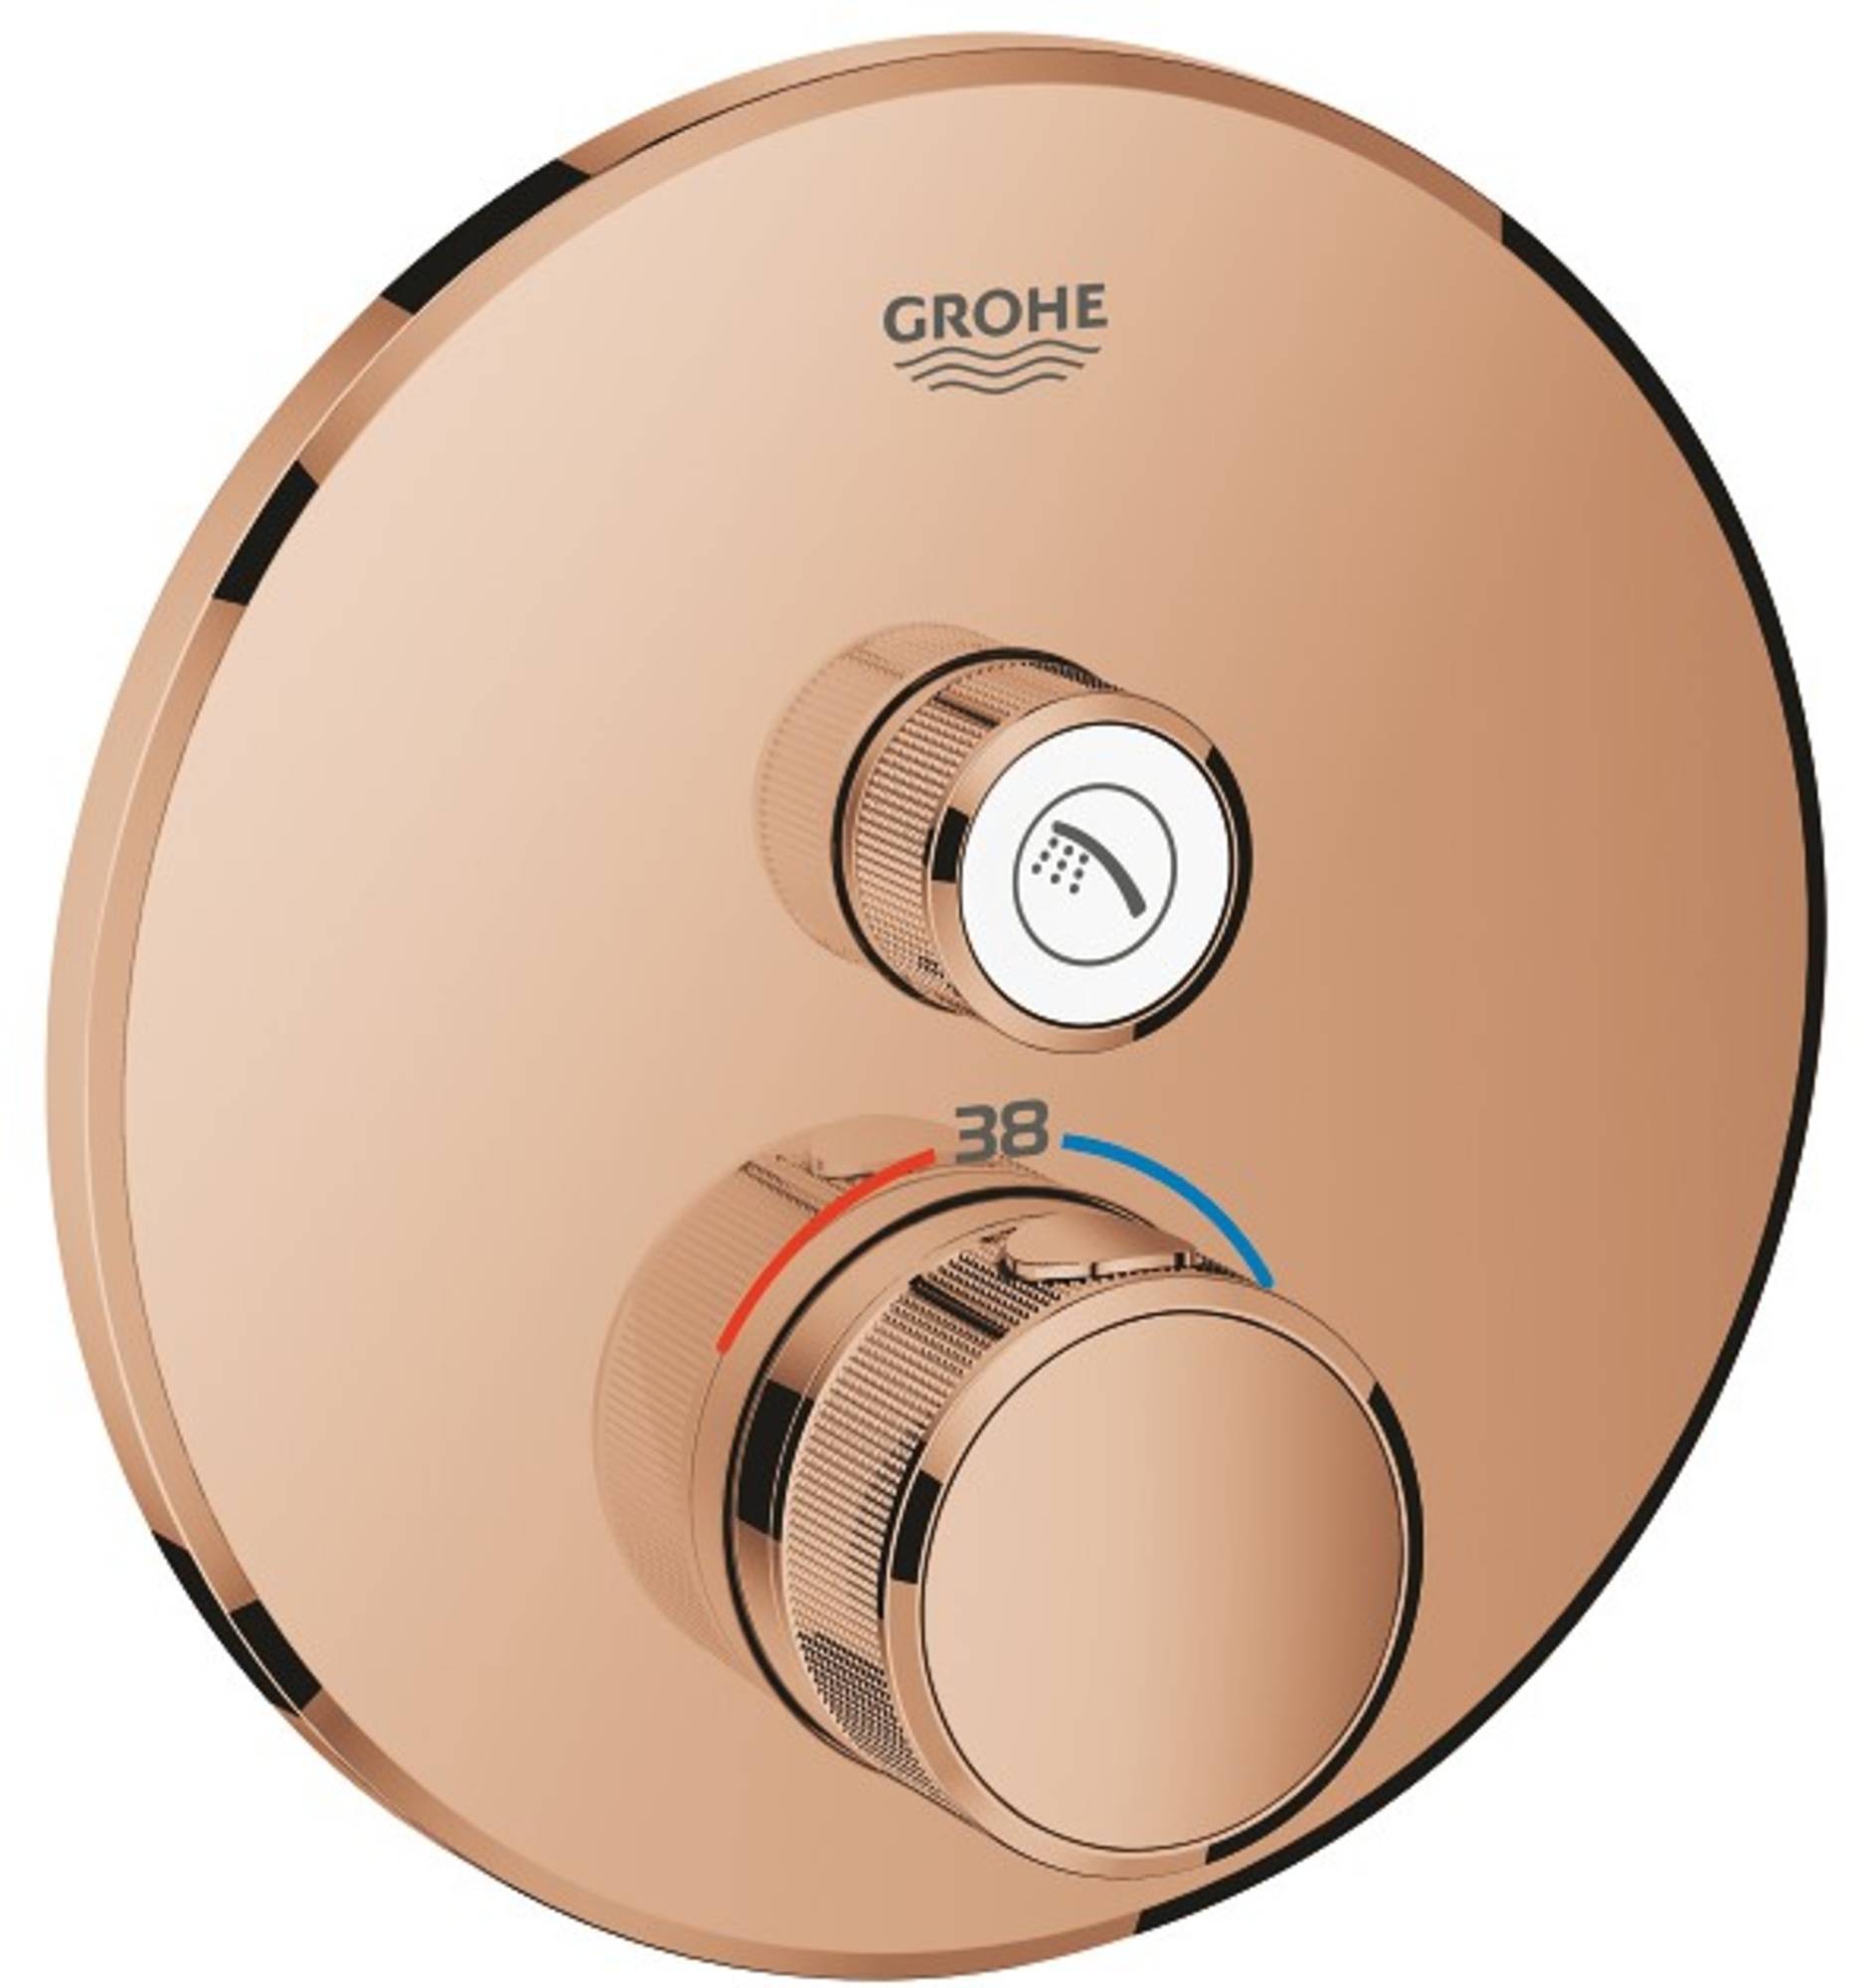 GROHE Grohtherm Smartcontrol Douche Opbouwdeel Rond 15,8x4,3 cm Warm Sunset